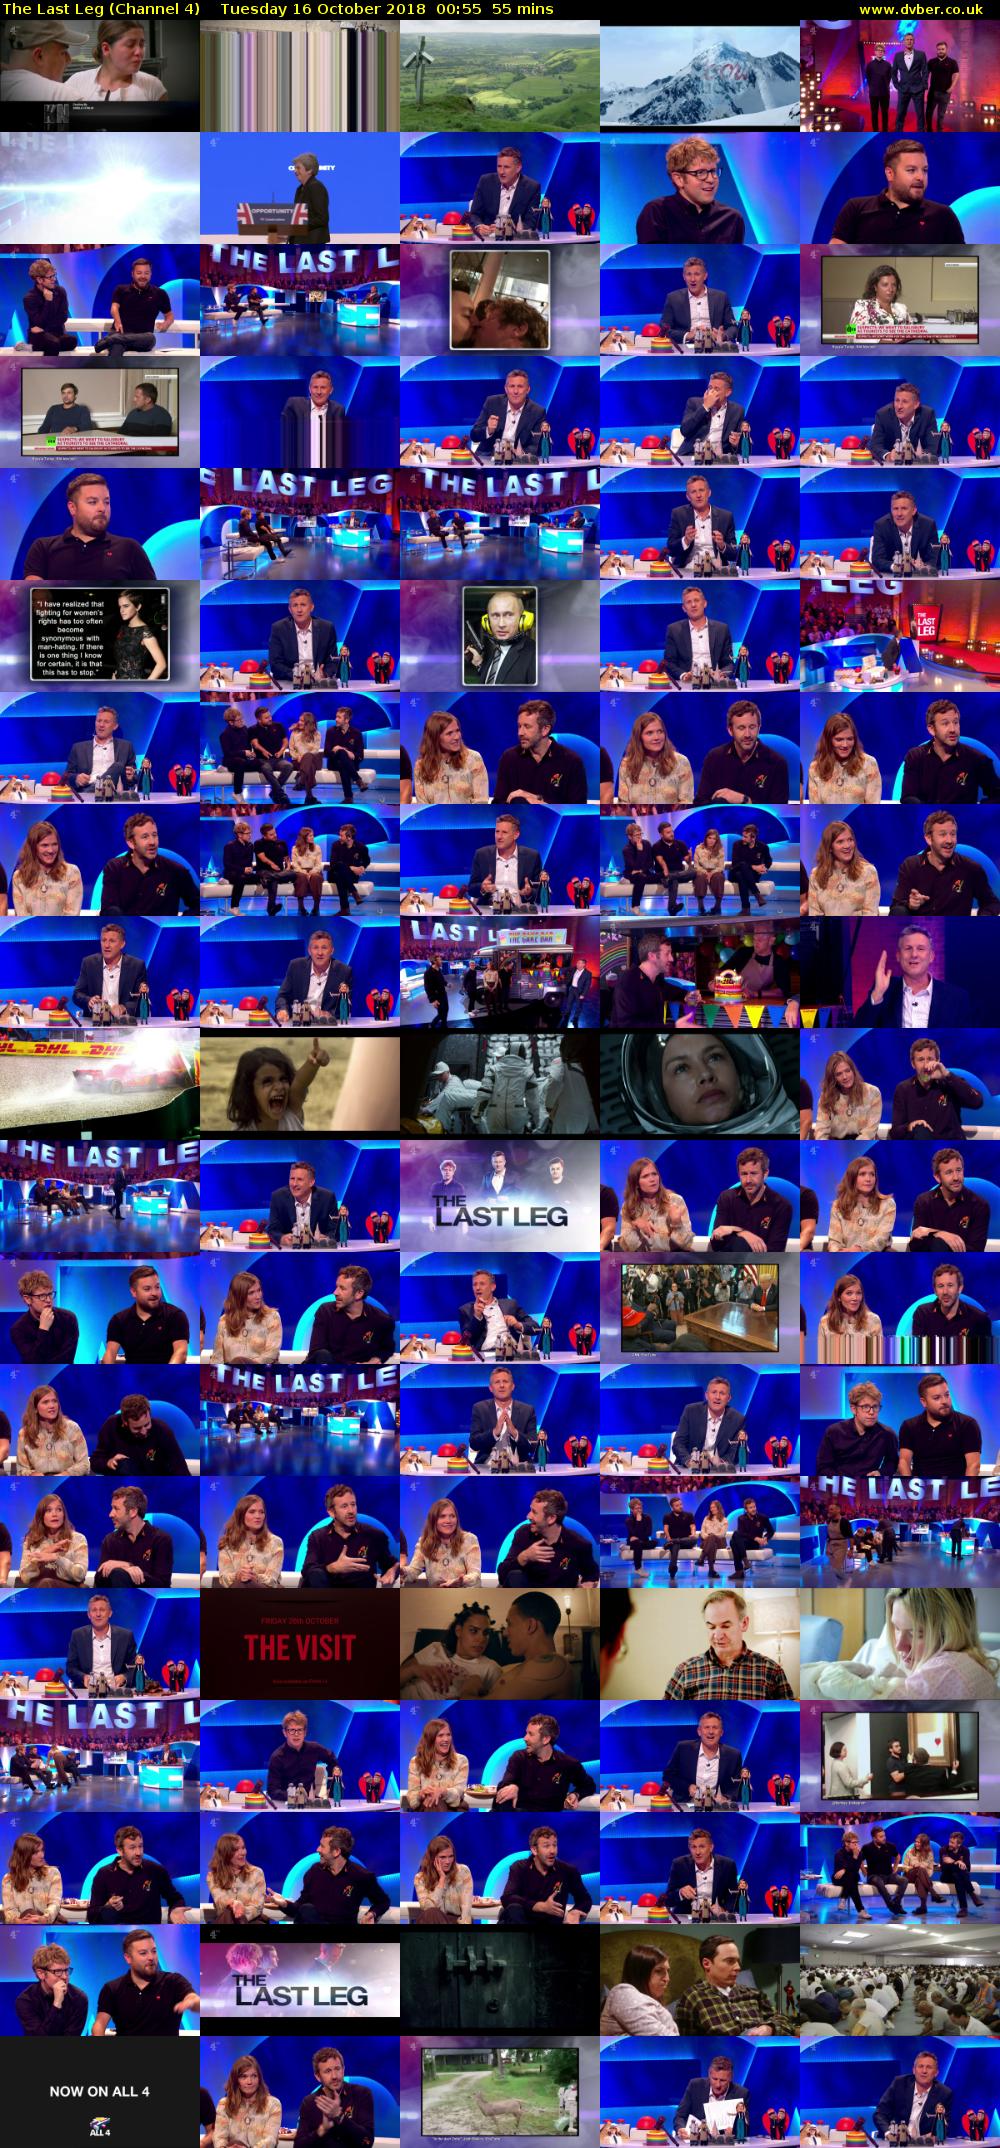 The Last Leg (Channel 4) Tuesday 16 October 2018 00:55 - 01:50